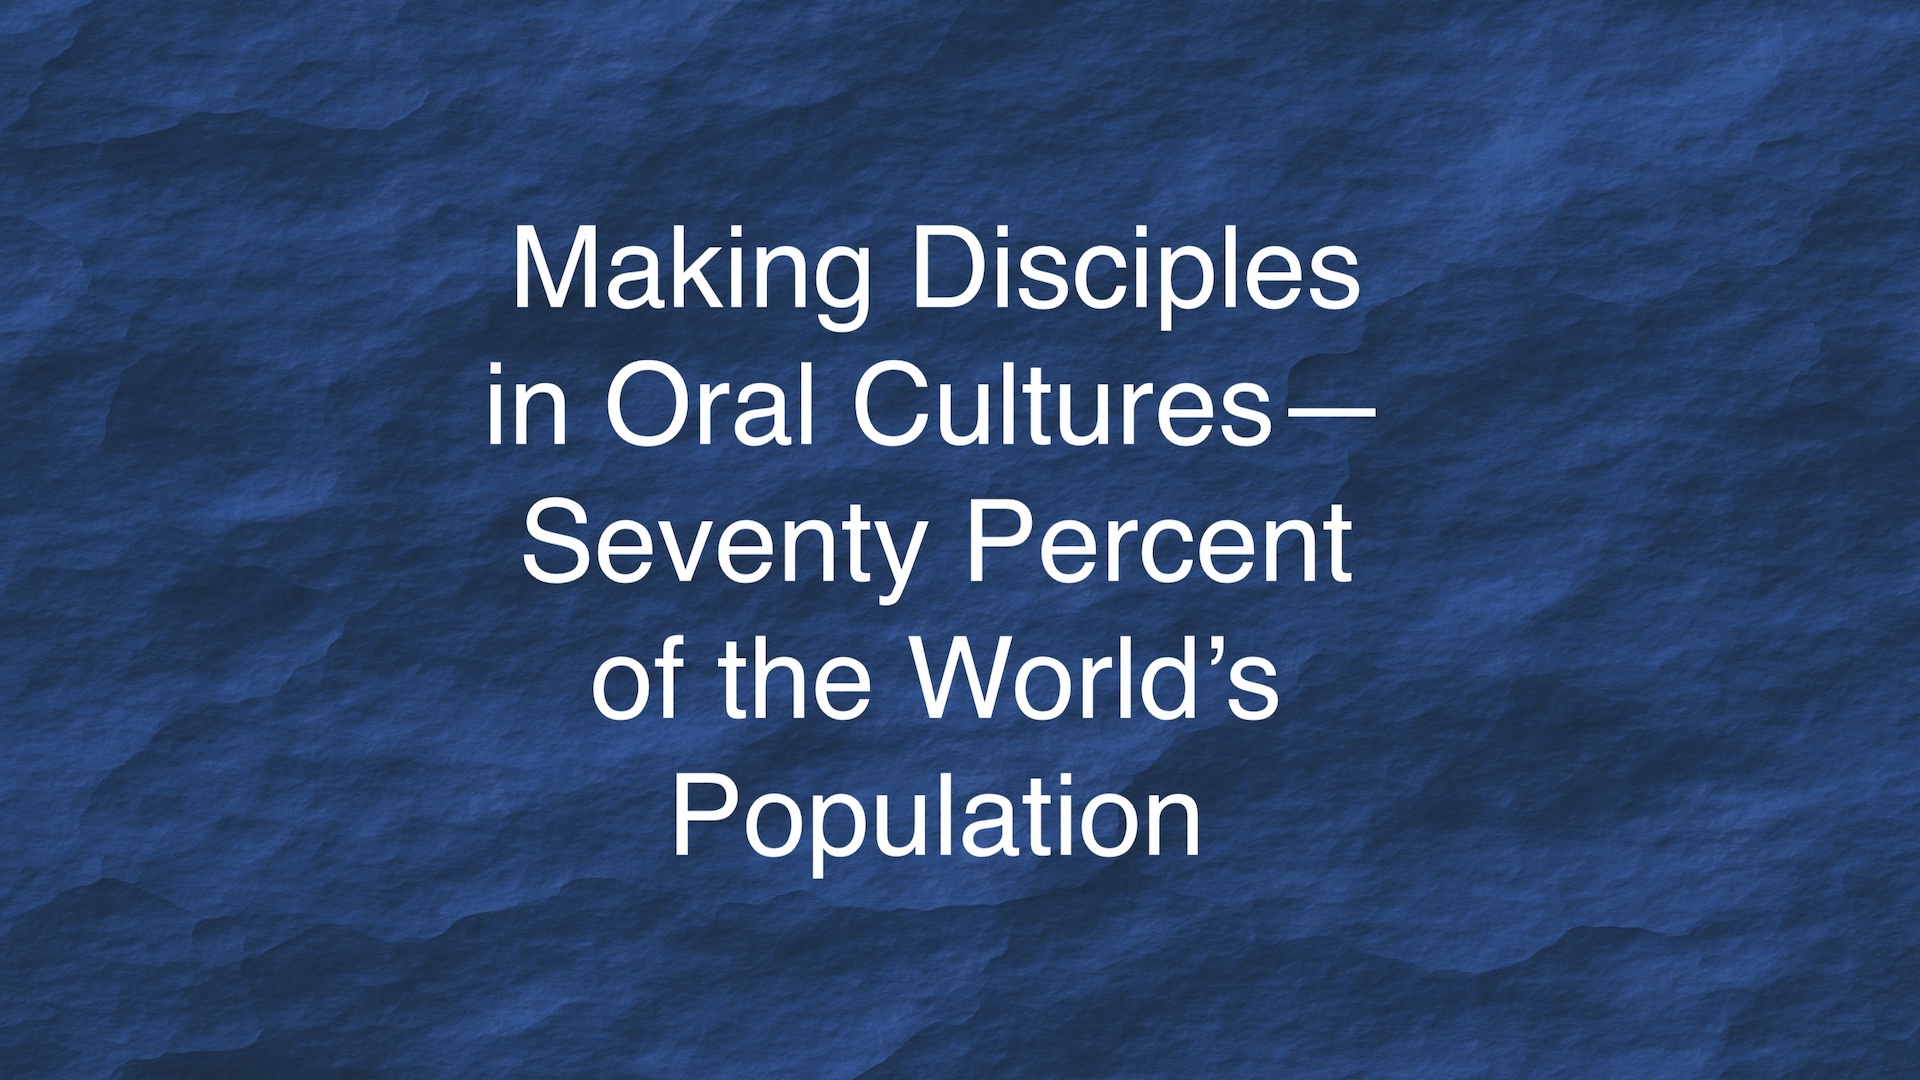 Making Disciples in oral cultures - Seventy Percent of the World's Population